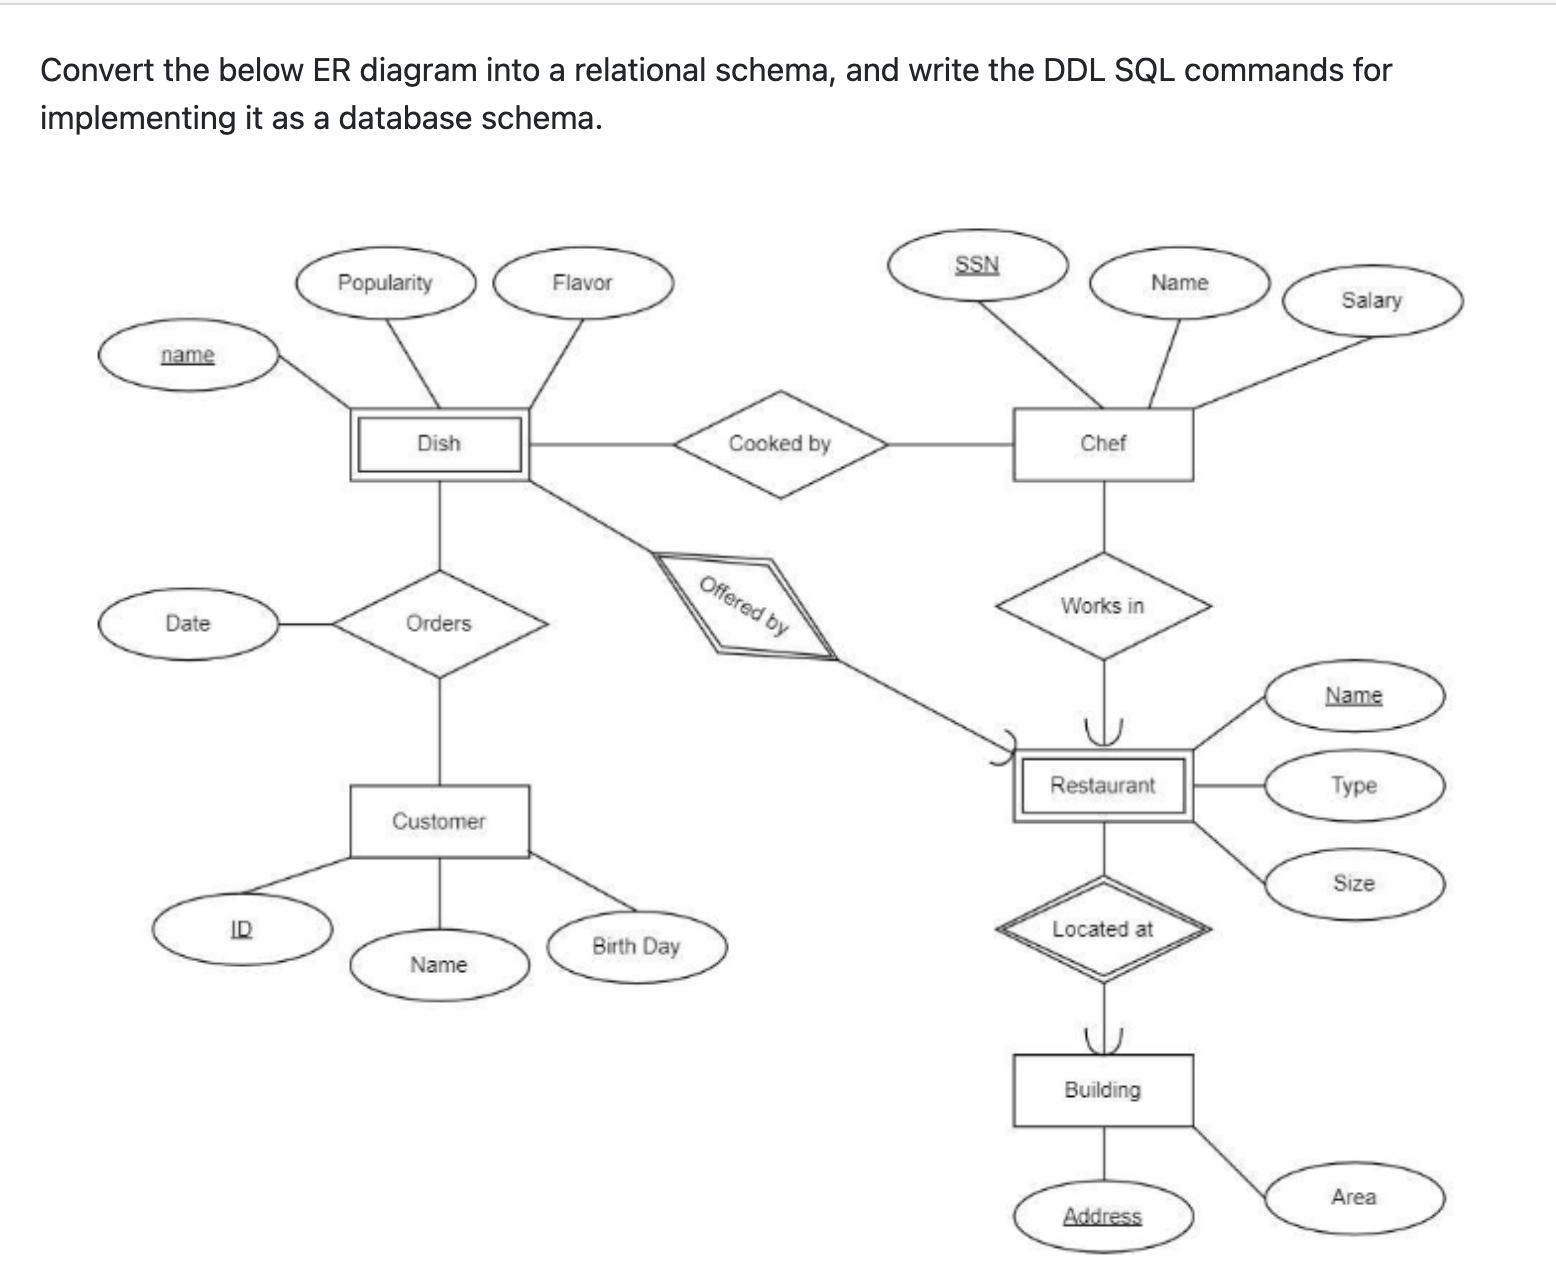 Convert the below ER diagram into a relational schema, and write the DDL SQL commands for implementing it as